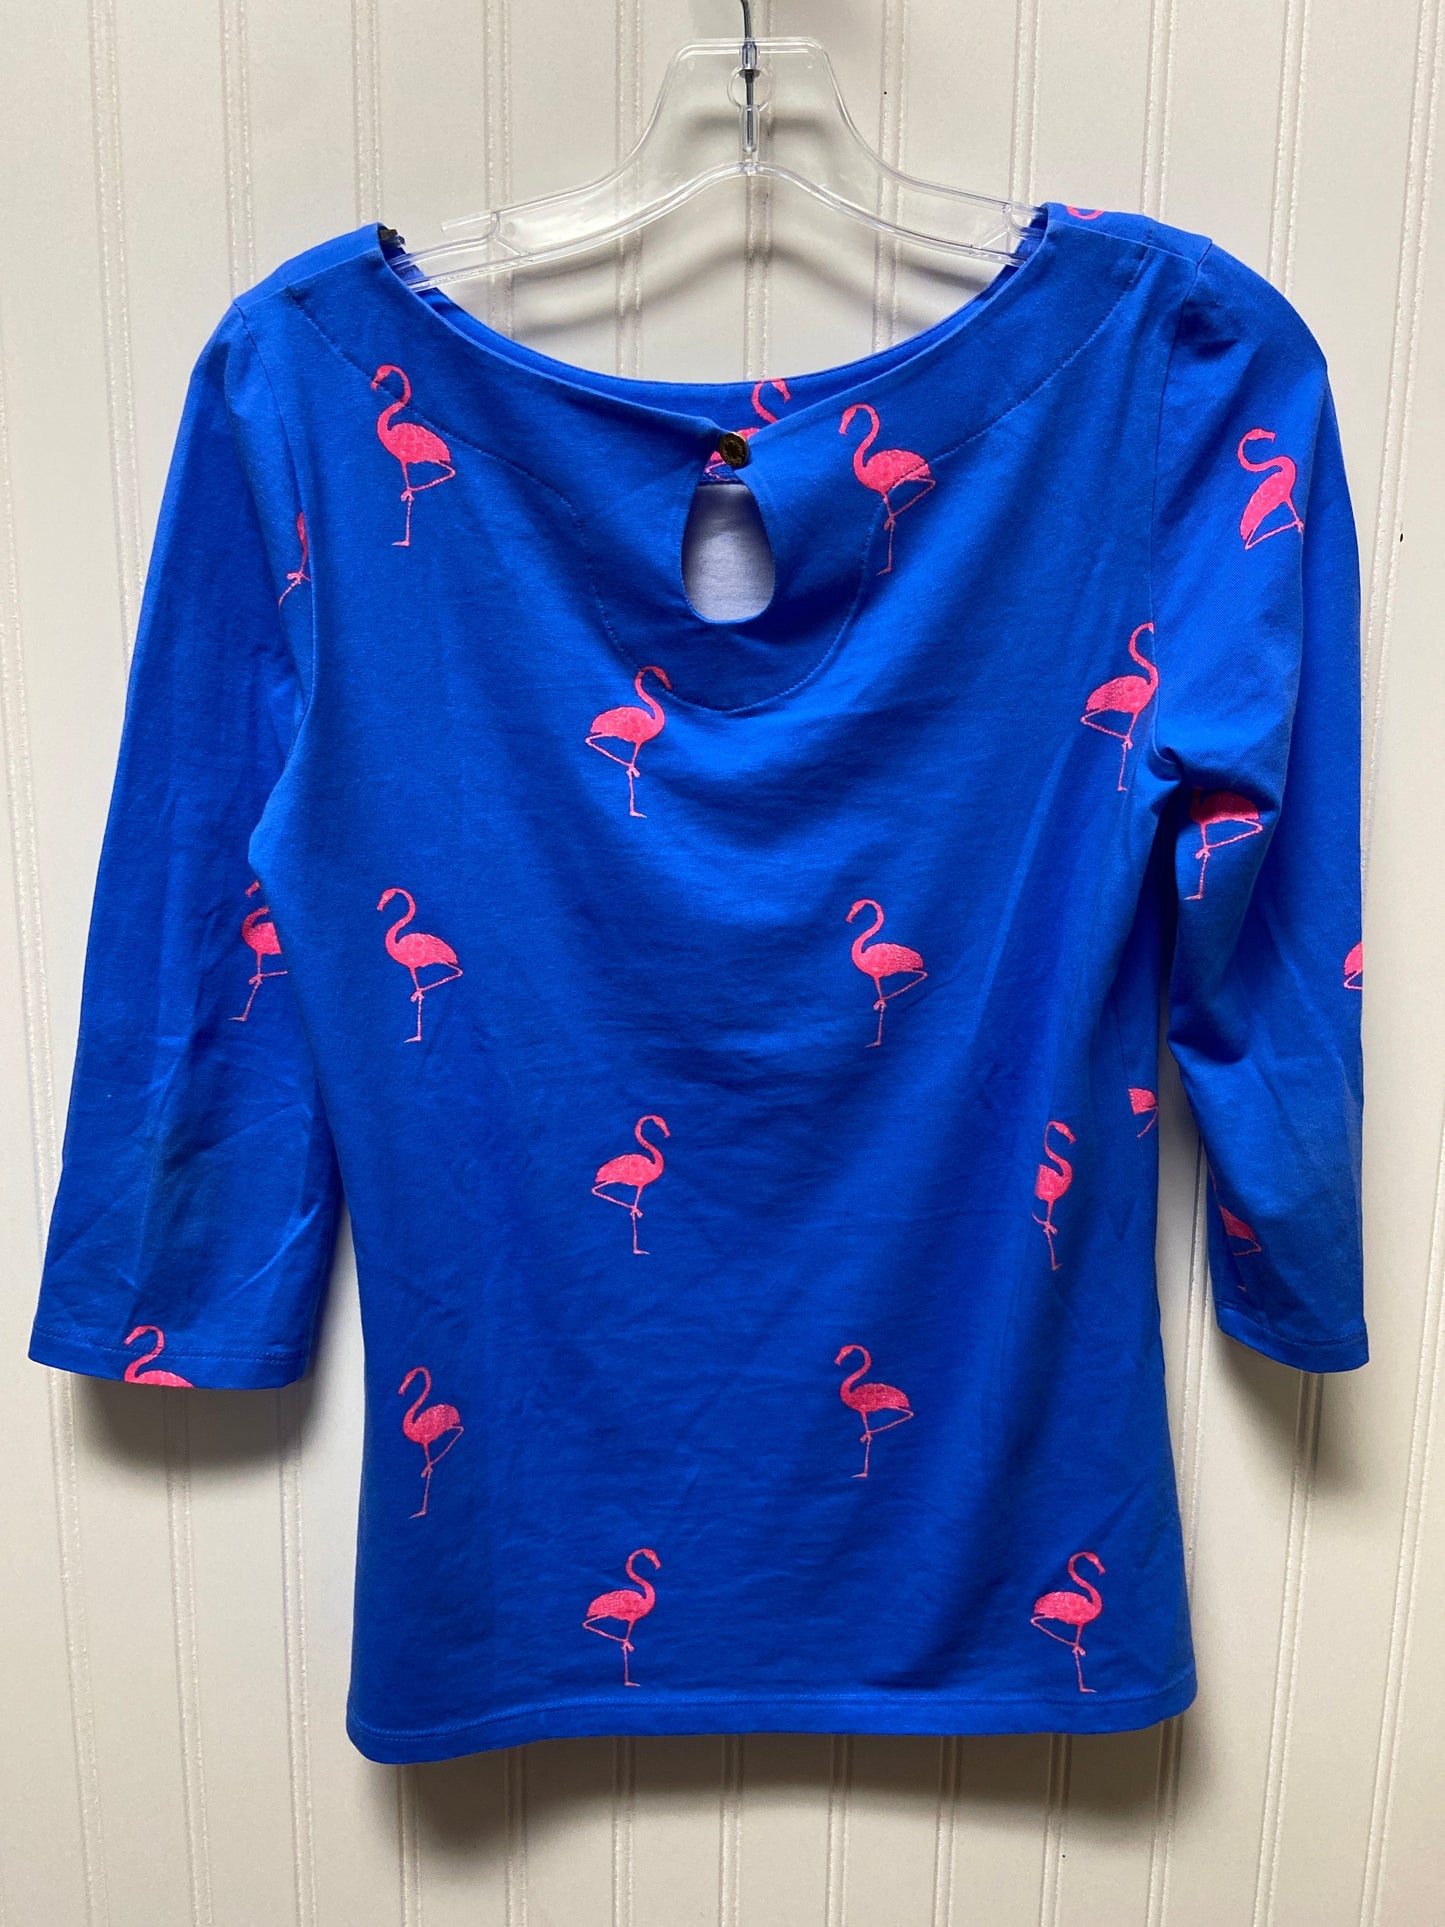 Blue Top Long Sleeve Designer Lilly Pulitzer, Size S